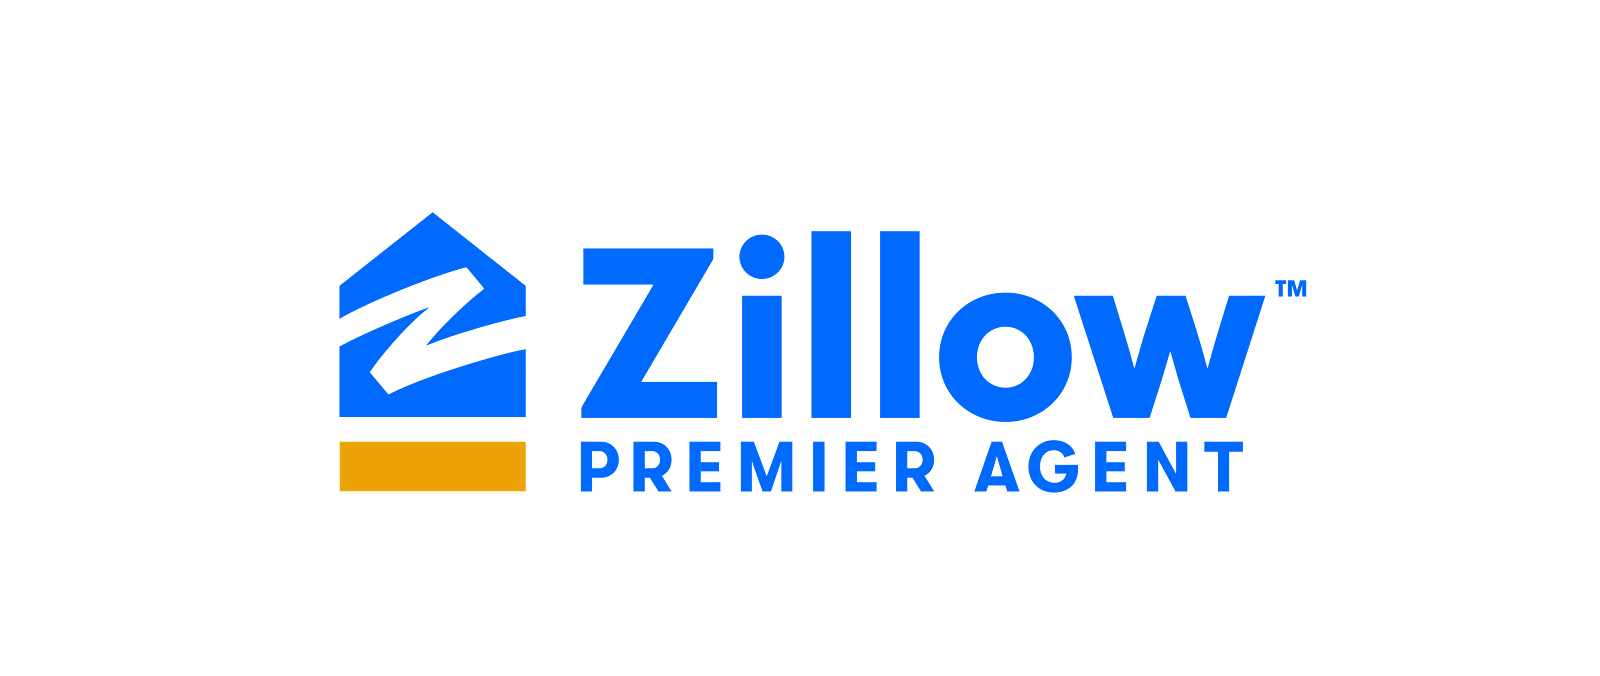 Zillow Premier Agent: A Real Estate Social Network